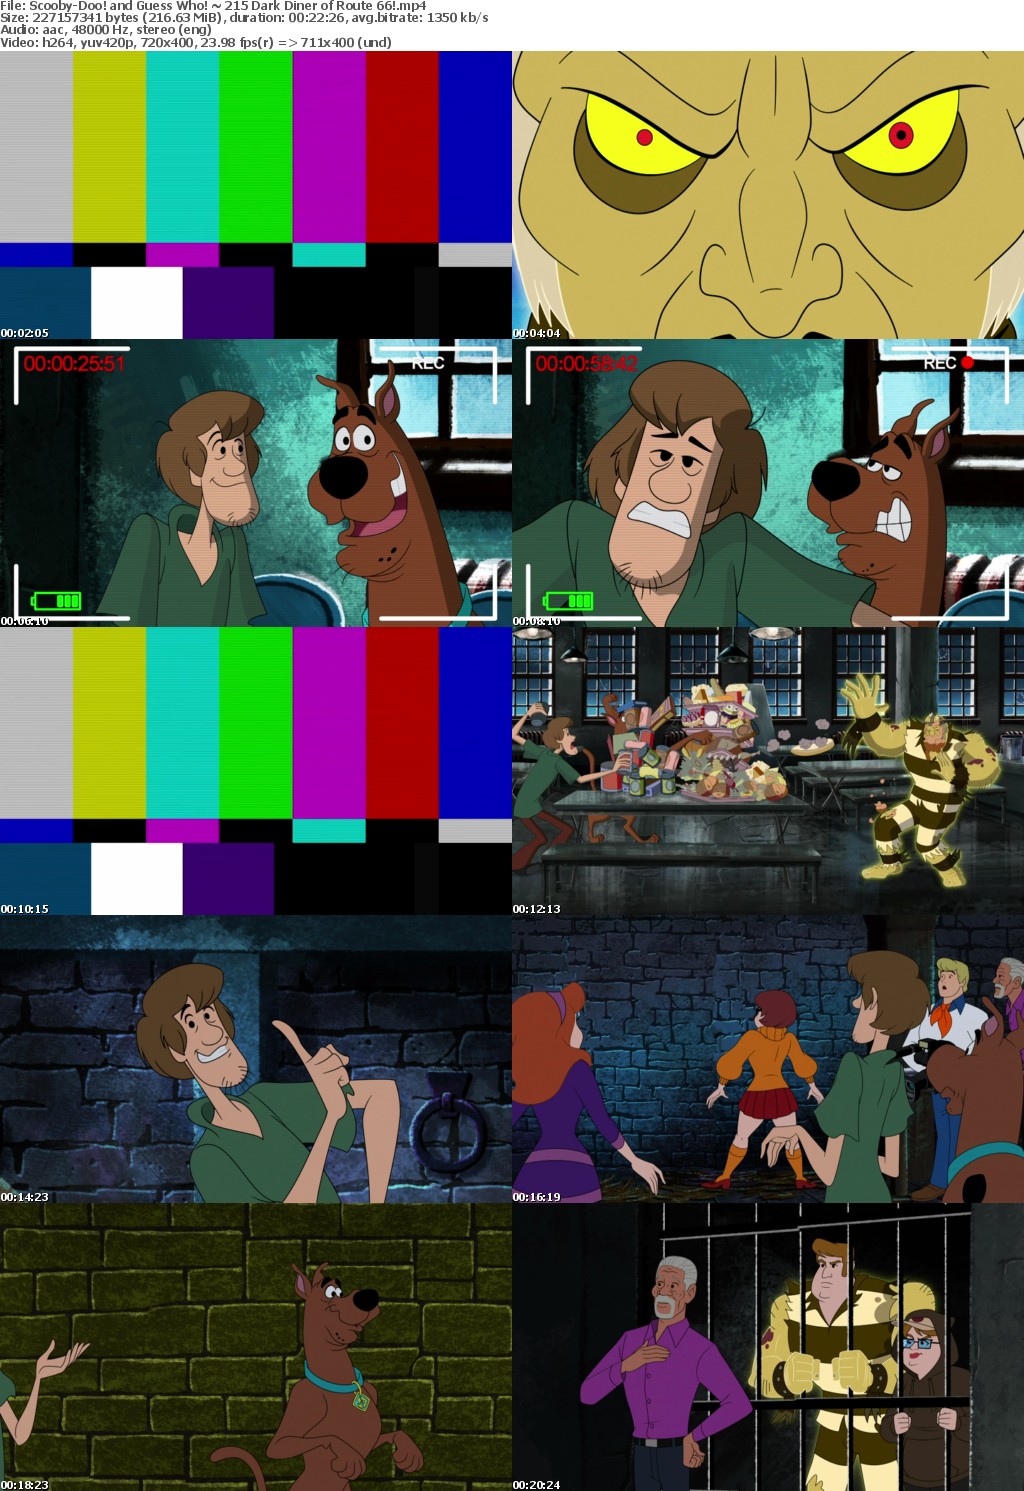 Ultimate Scooby-Doo! Collection Missing Episodes S02E214-226 for Guess Who!